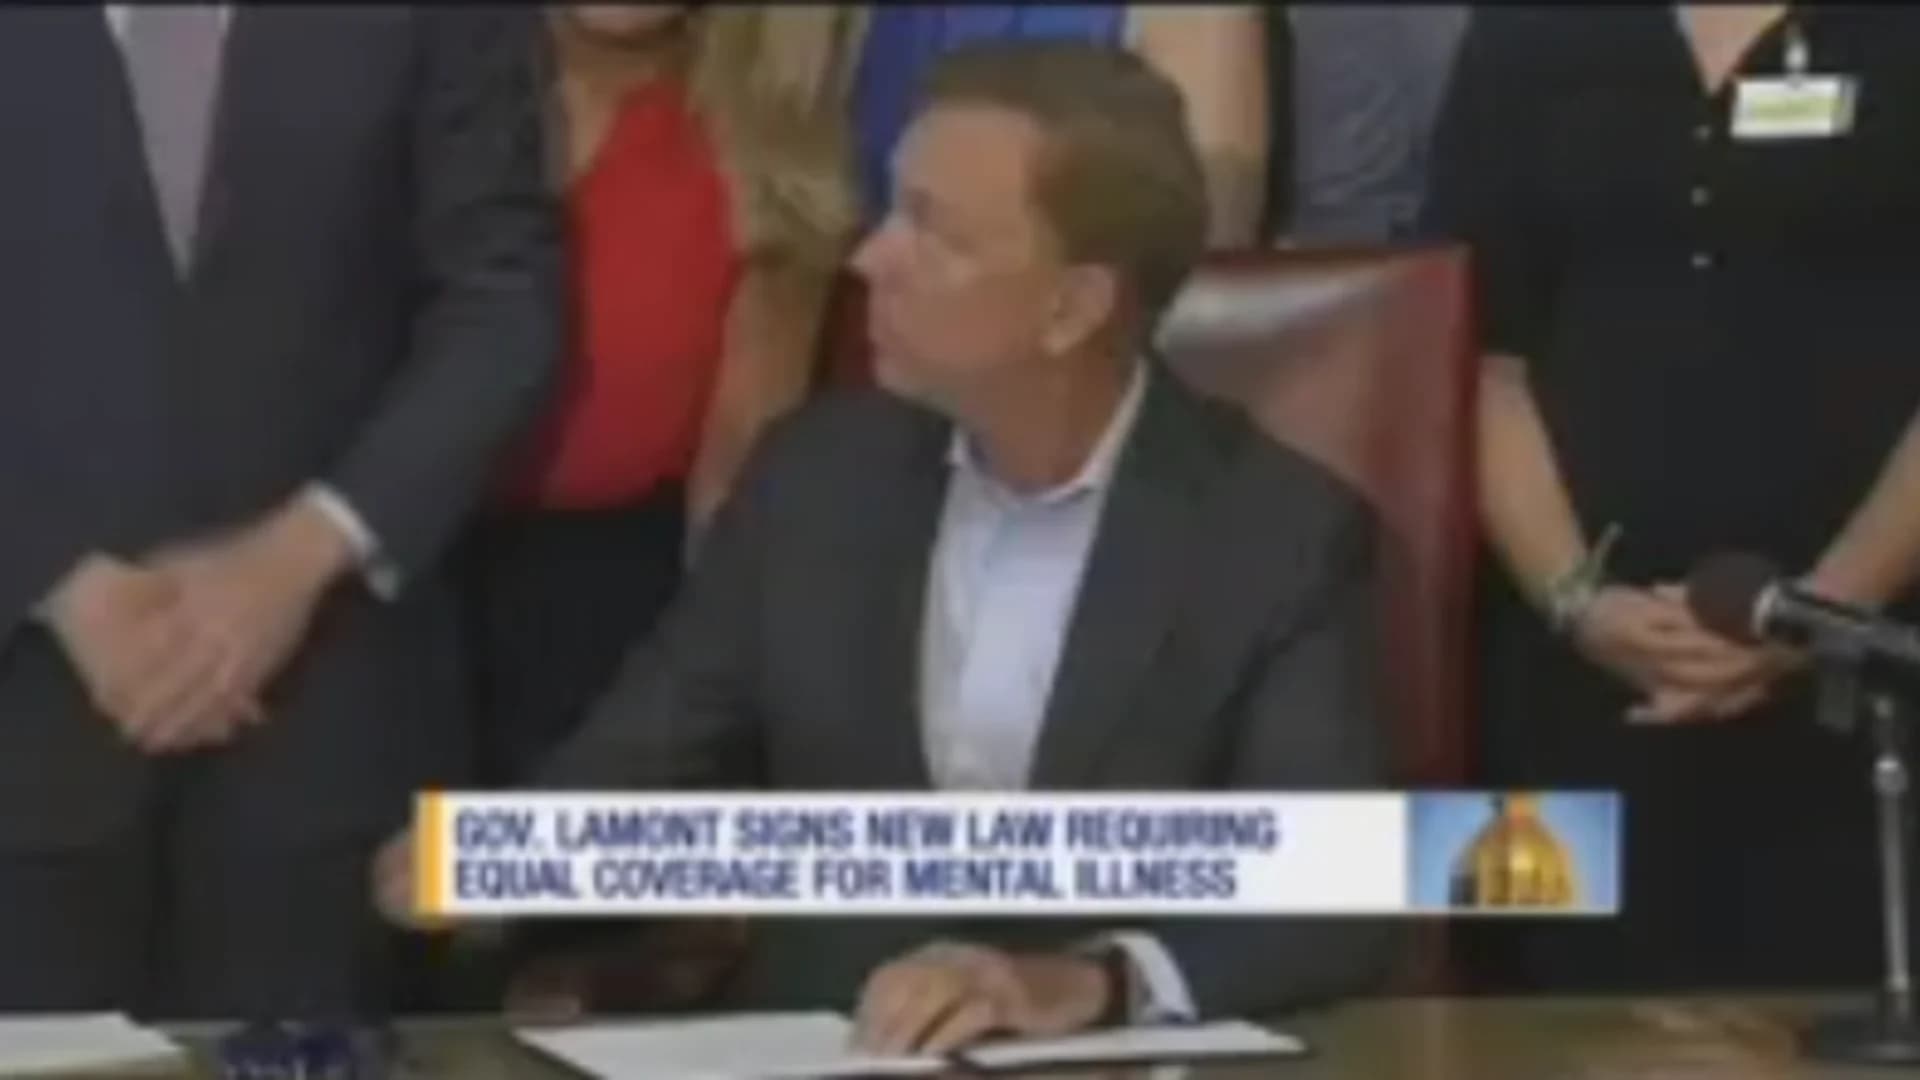 Lamont signs legislation allowing full retirement pay for officers disabled on the job